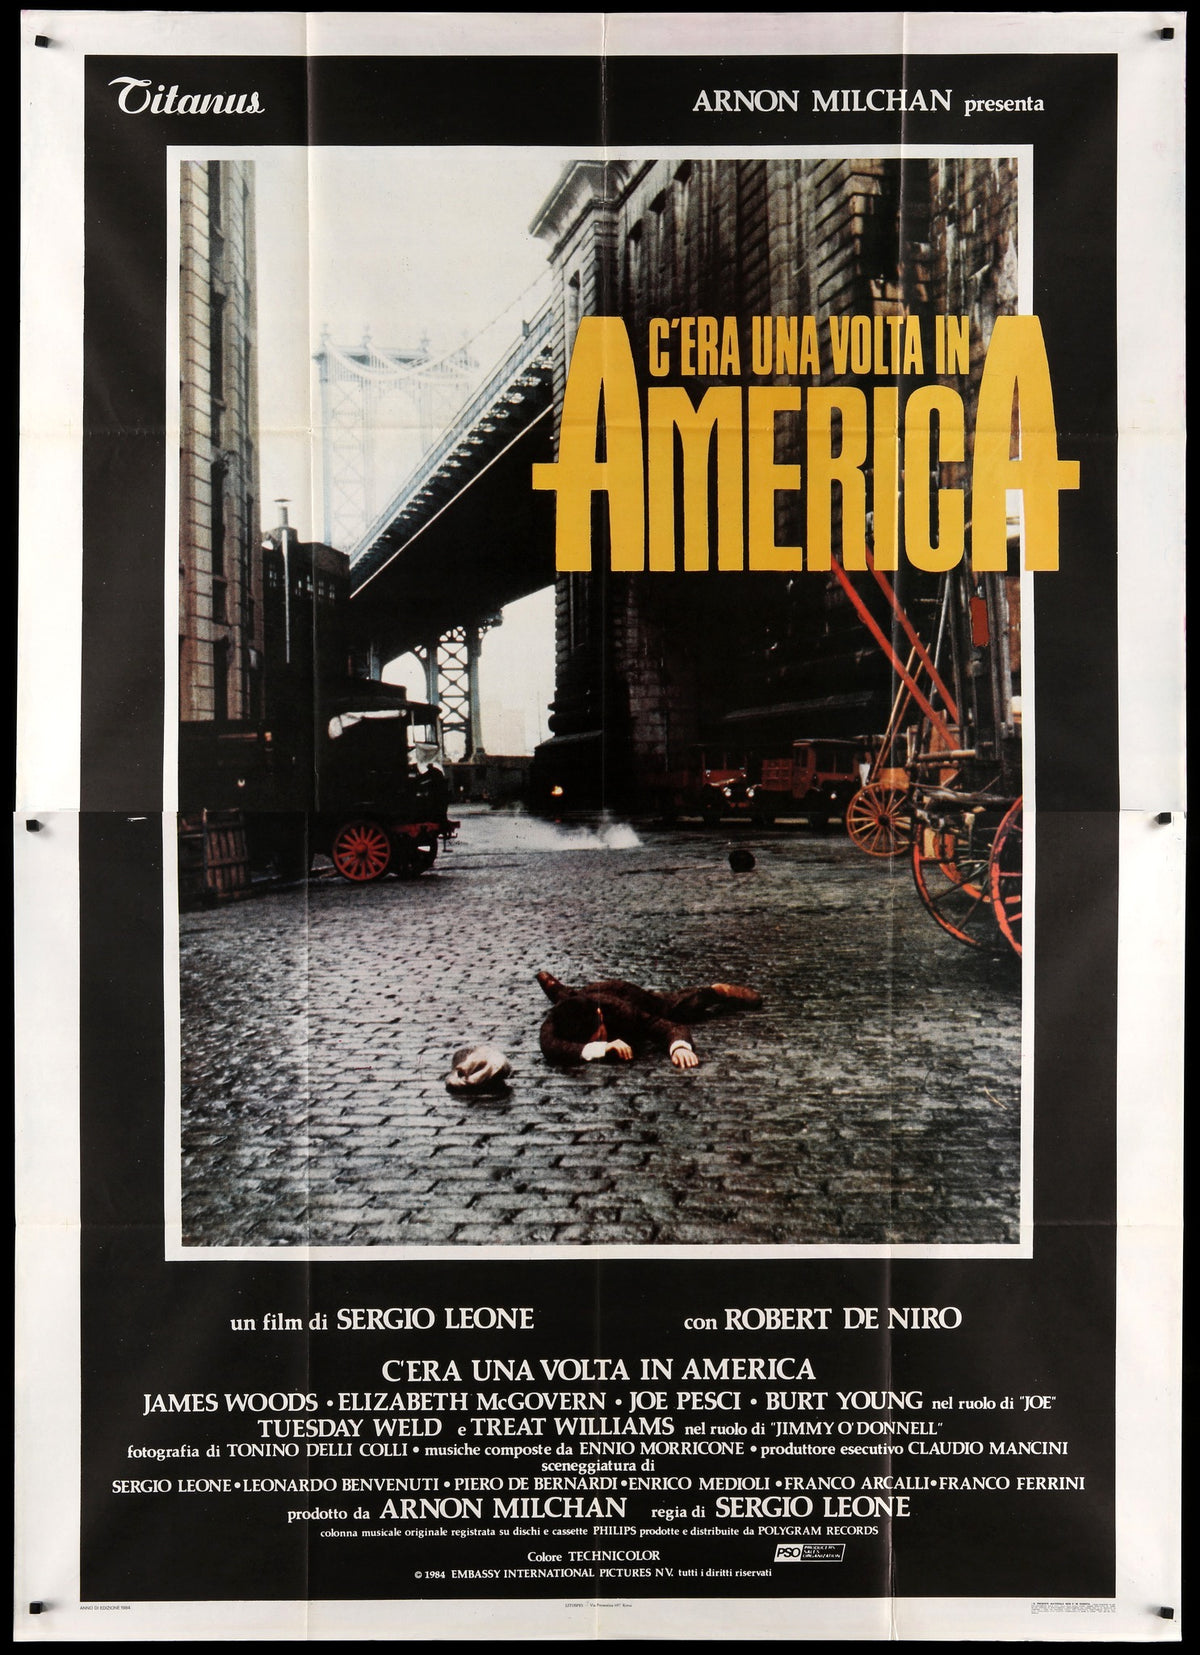 Once Upon a Time in America (1984) original movie poster for sale at Original Film Art